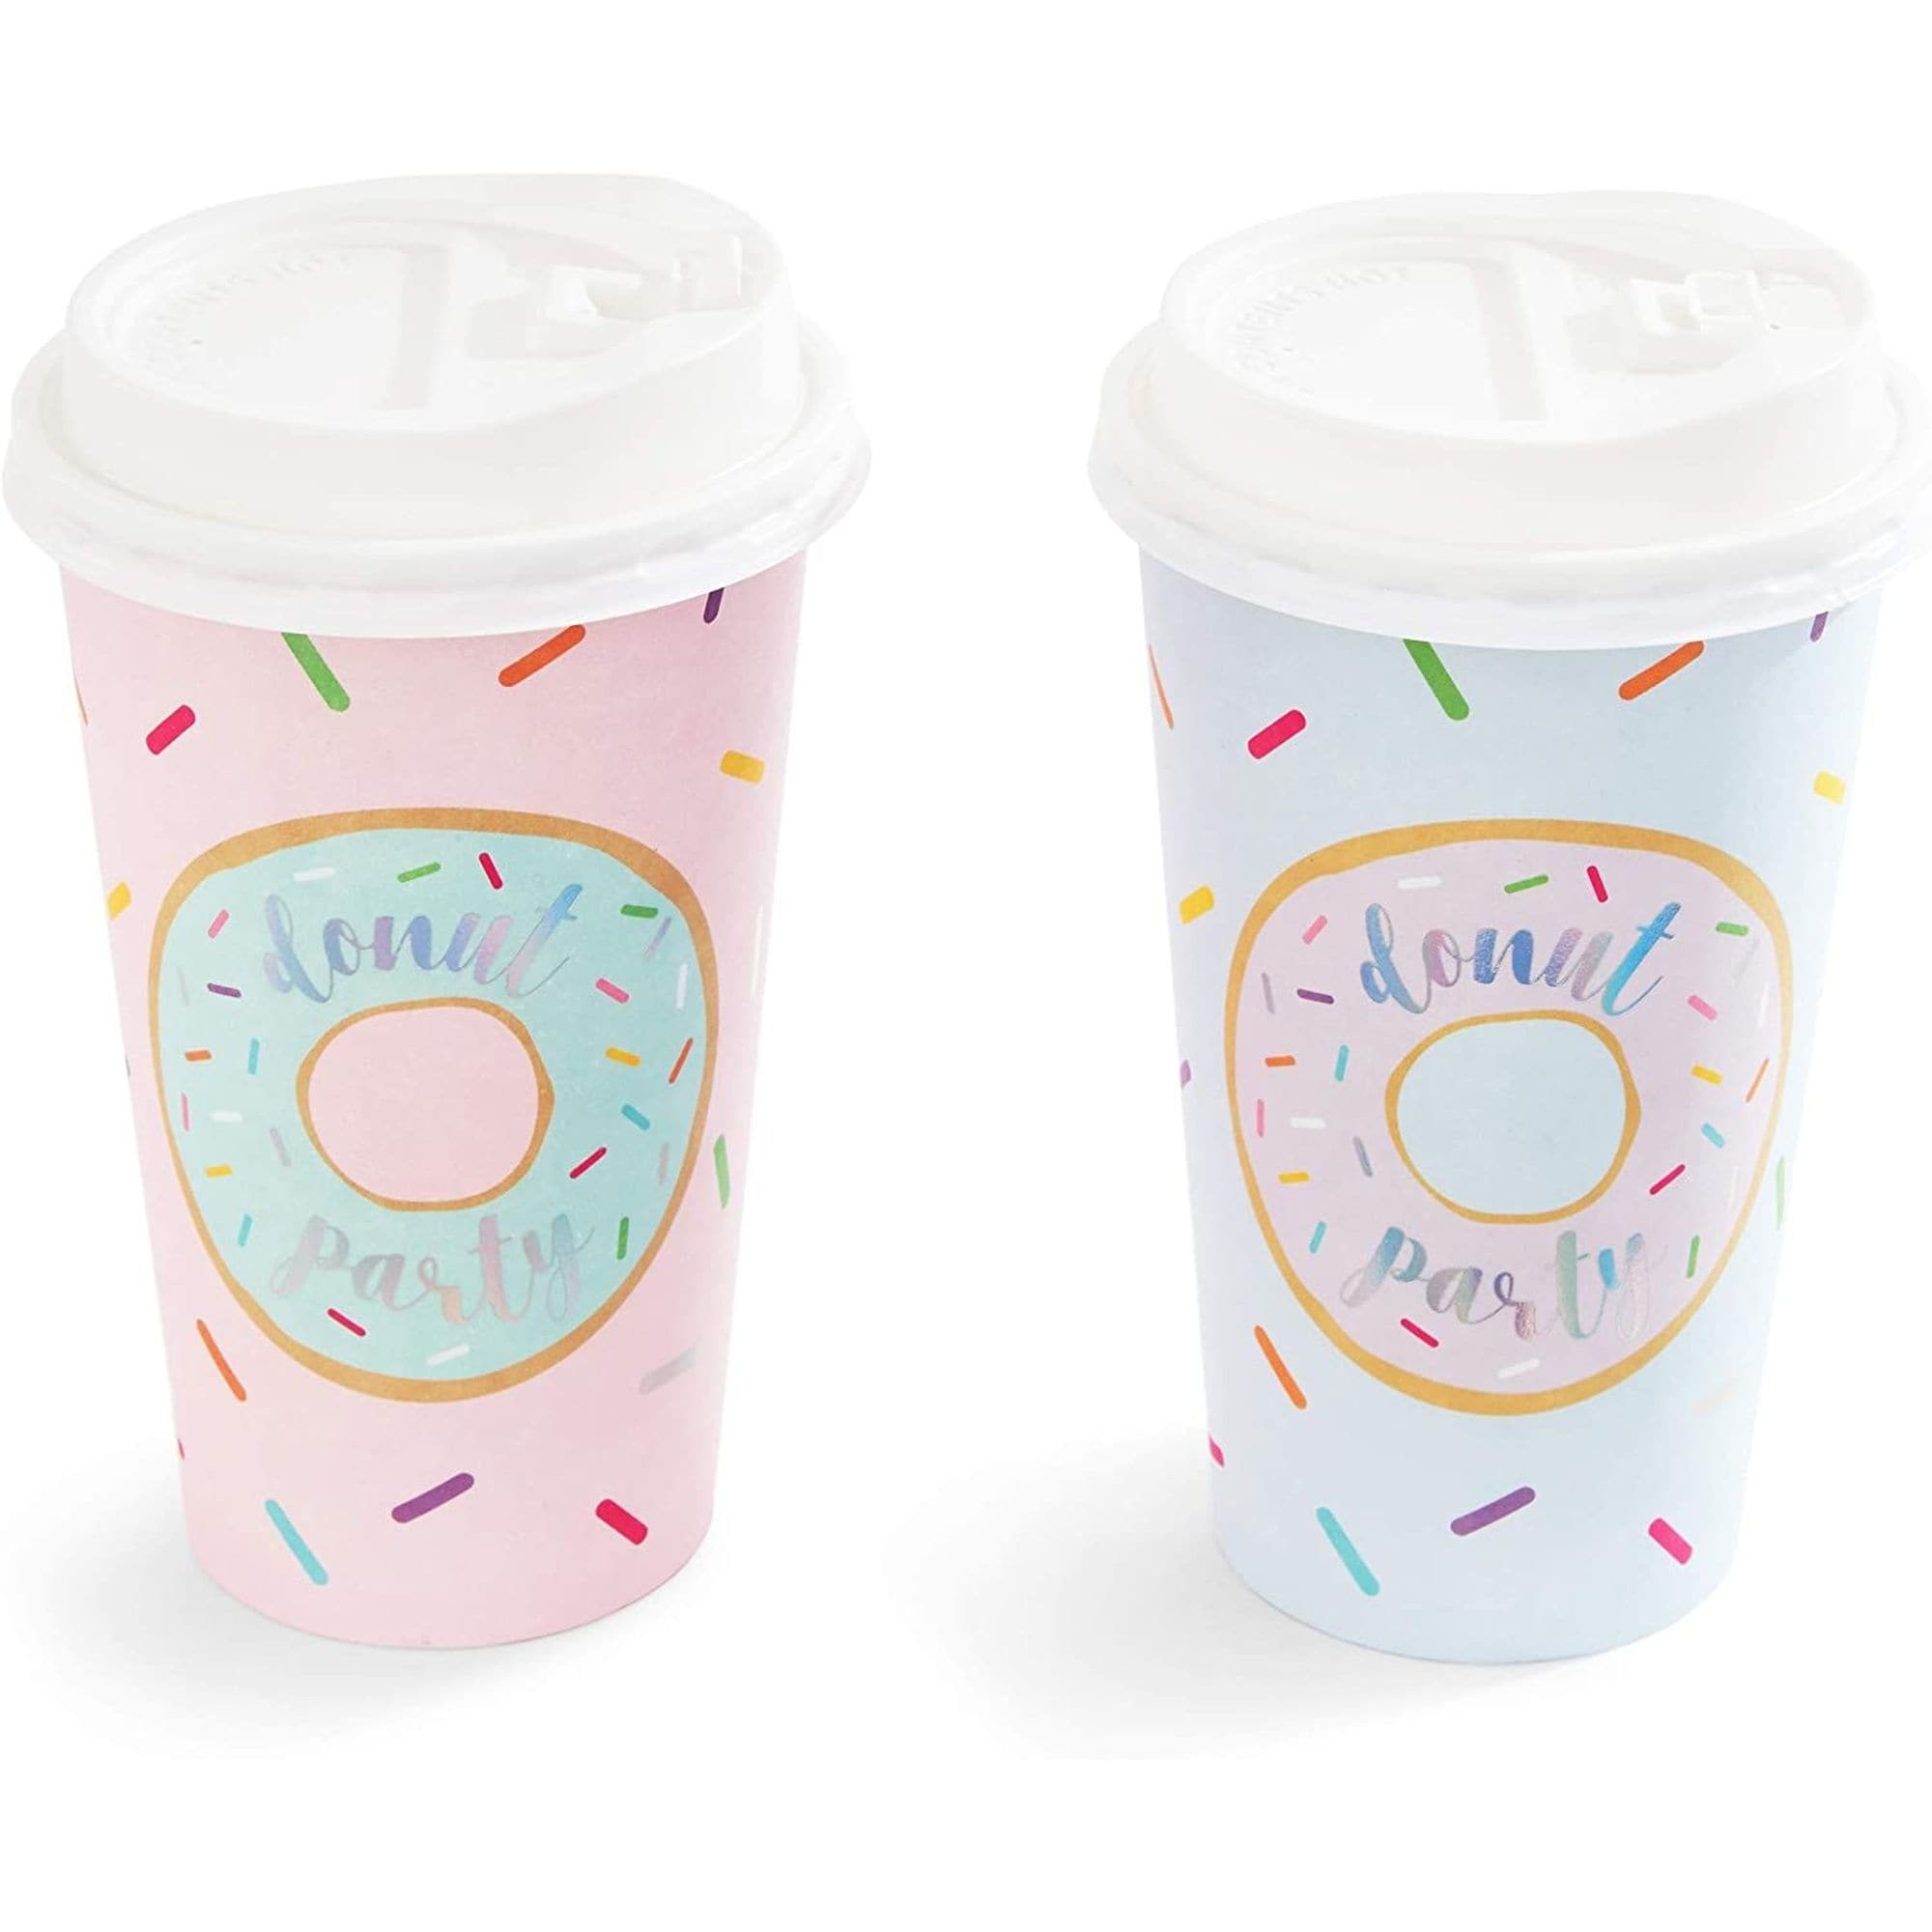 https://ak1.ostkcdn.com/images/products/is/images/direct/d7029608ecc9ef8f7281f02990e378788529a7fd/48x-Pastel-Insulated-Disposable-Paper-Coffee-Cups-with-Lids-for-Donut-Party-16oz.jpg